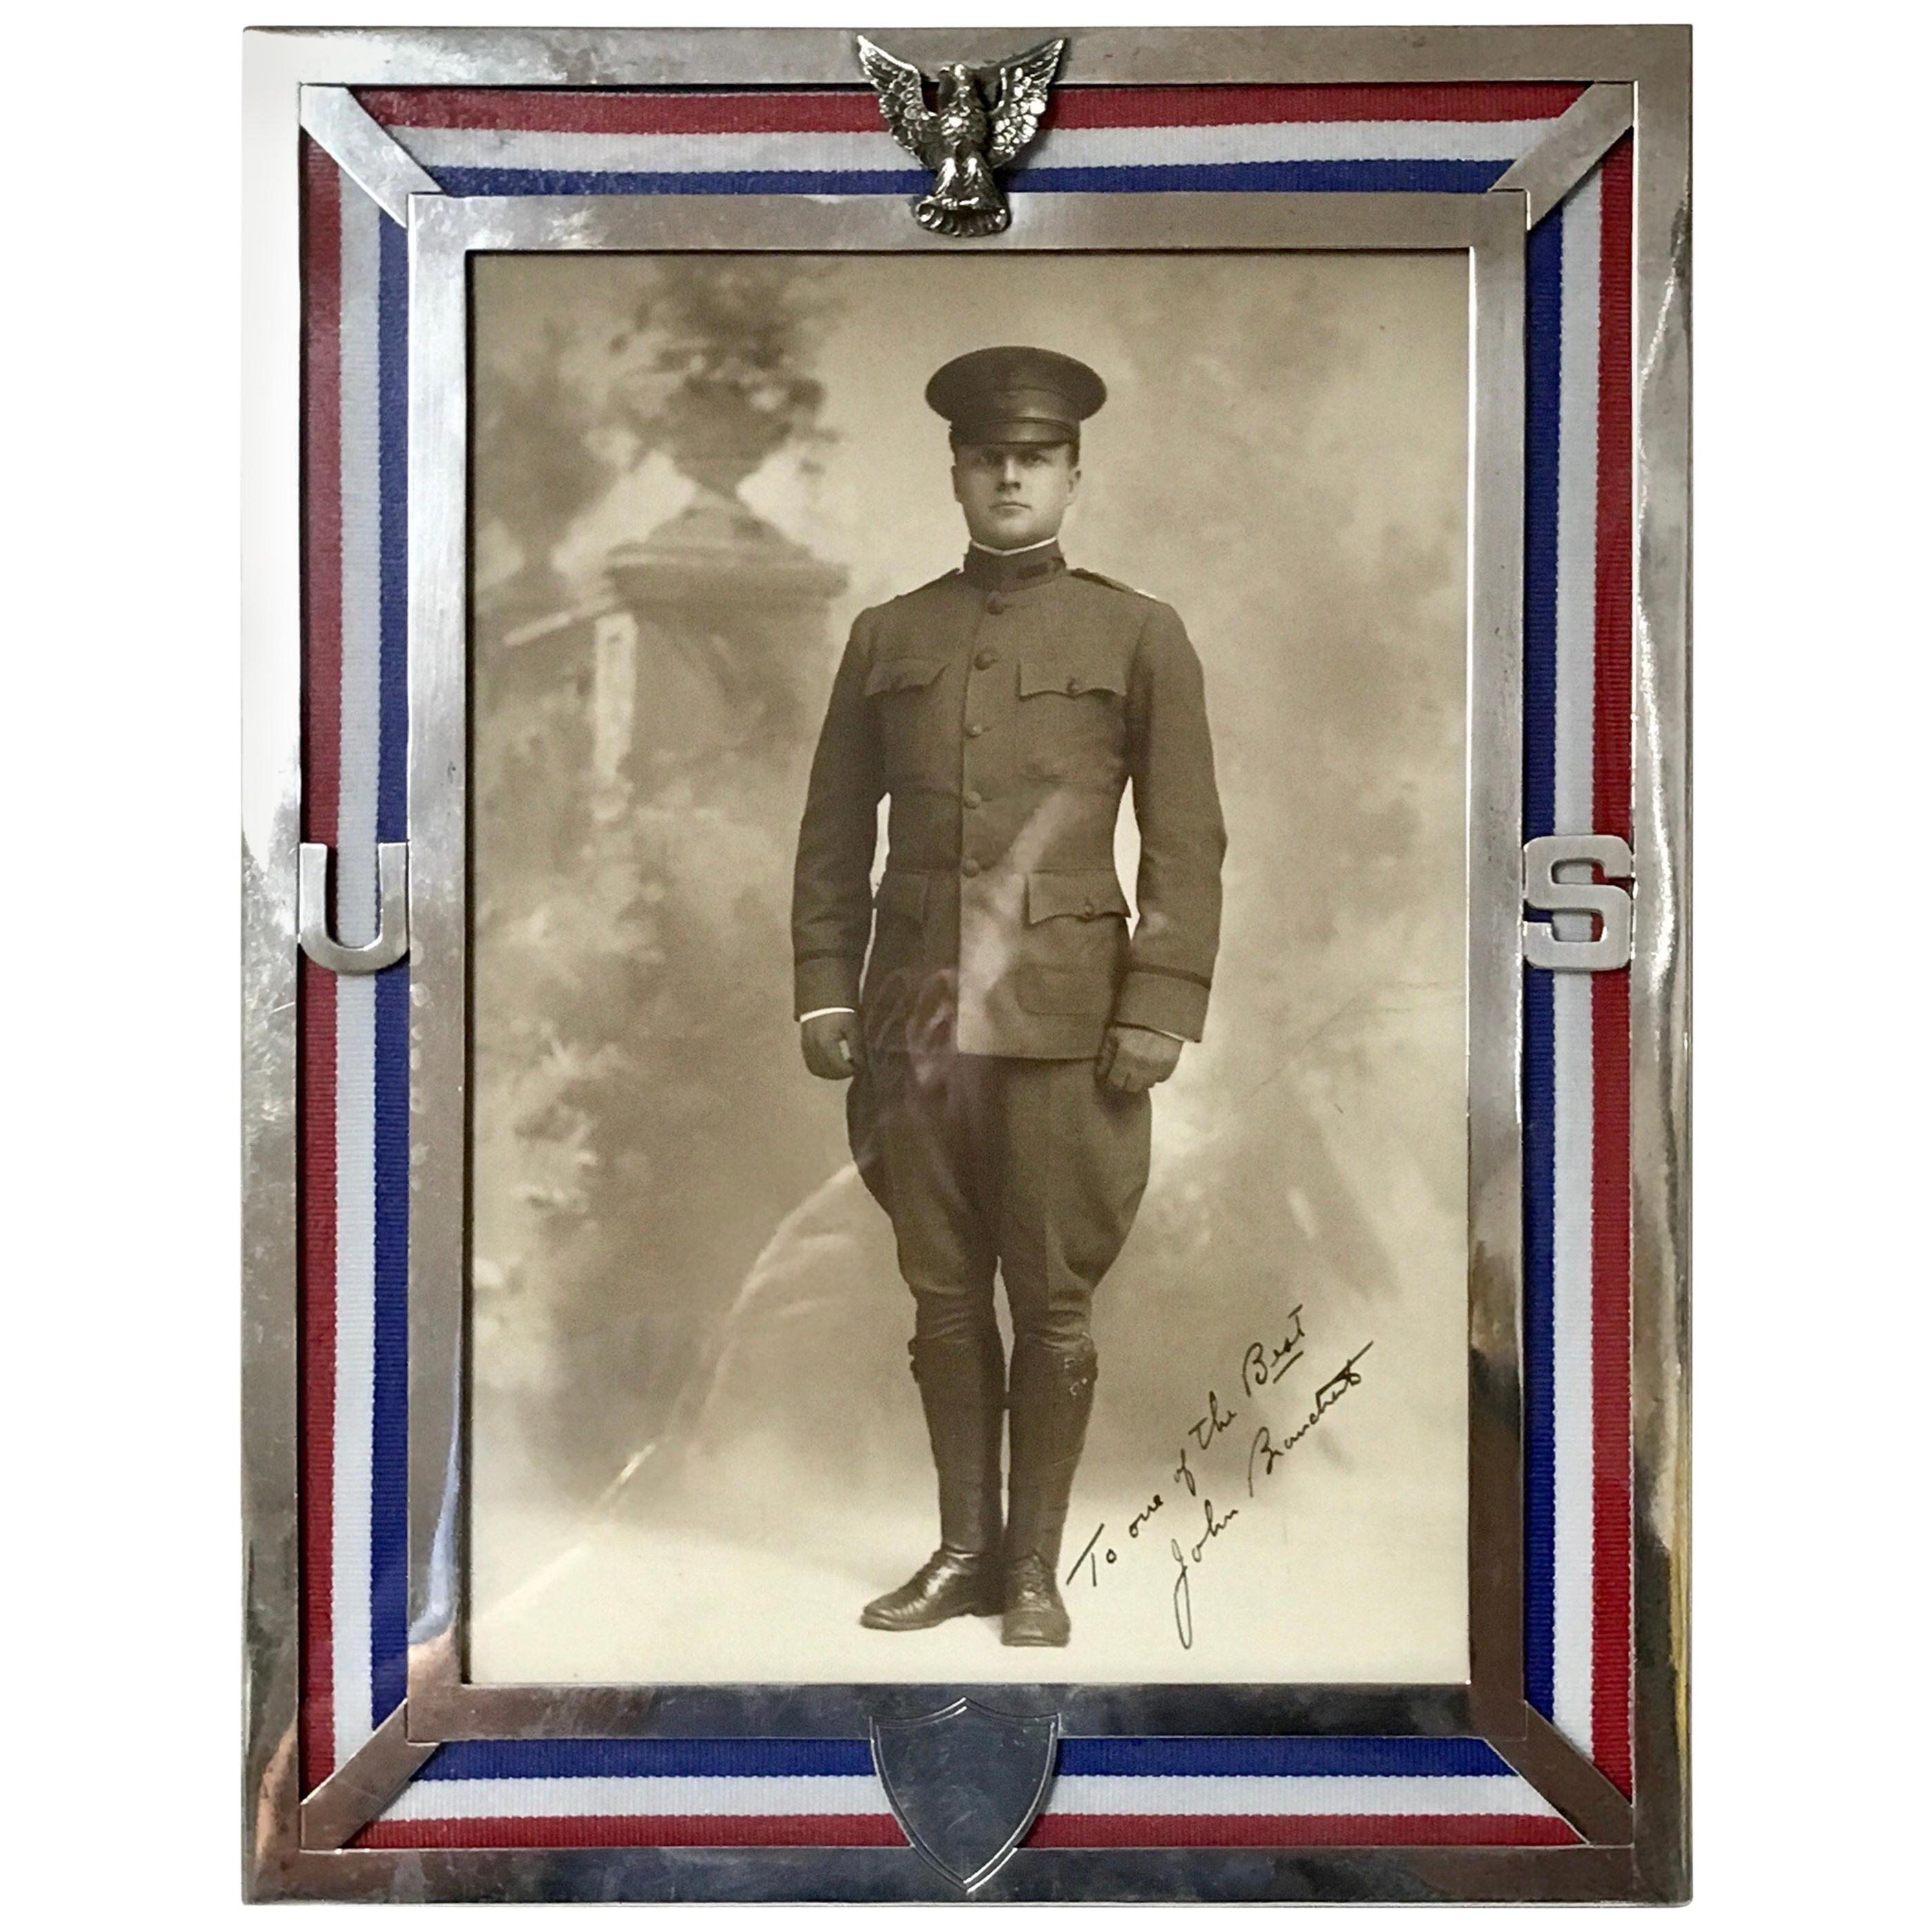 US Military Sterling Eagle Motif Frame, WWI Era, by Theodore B. Starr